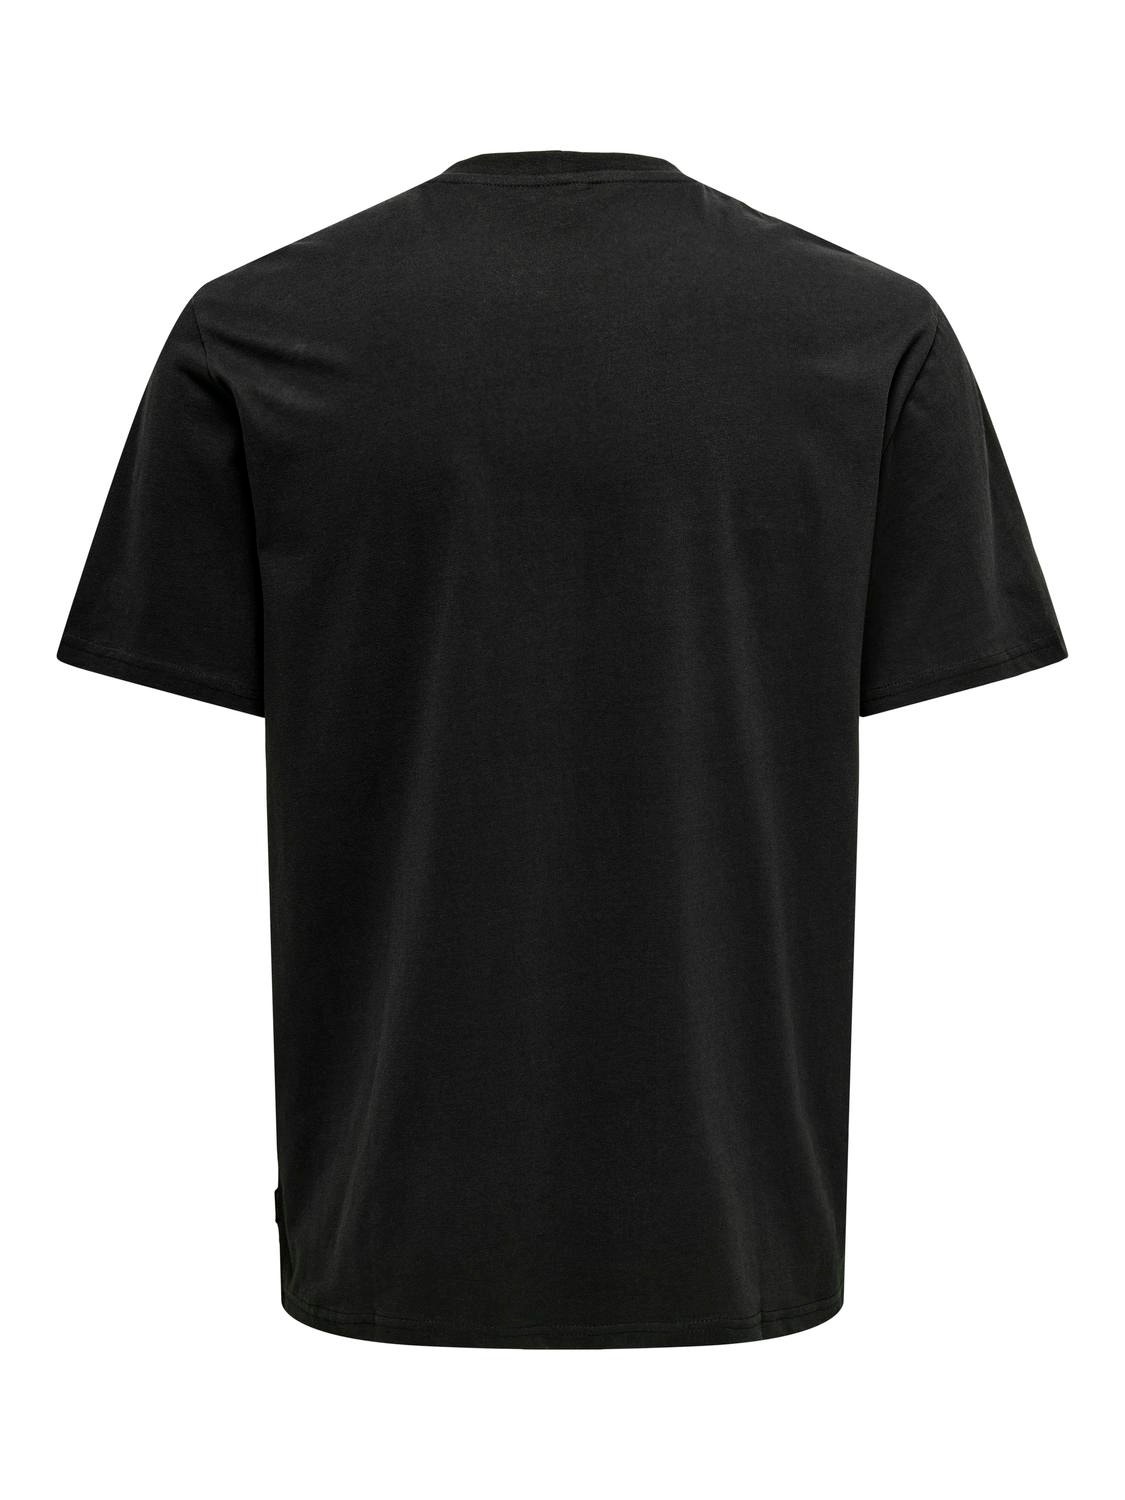 ONLY & SONS O-neck t-shirt with print -Black - 22028752